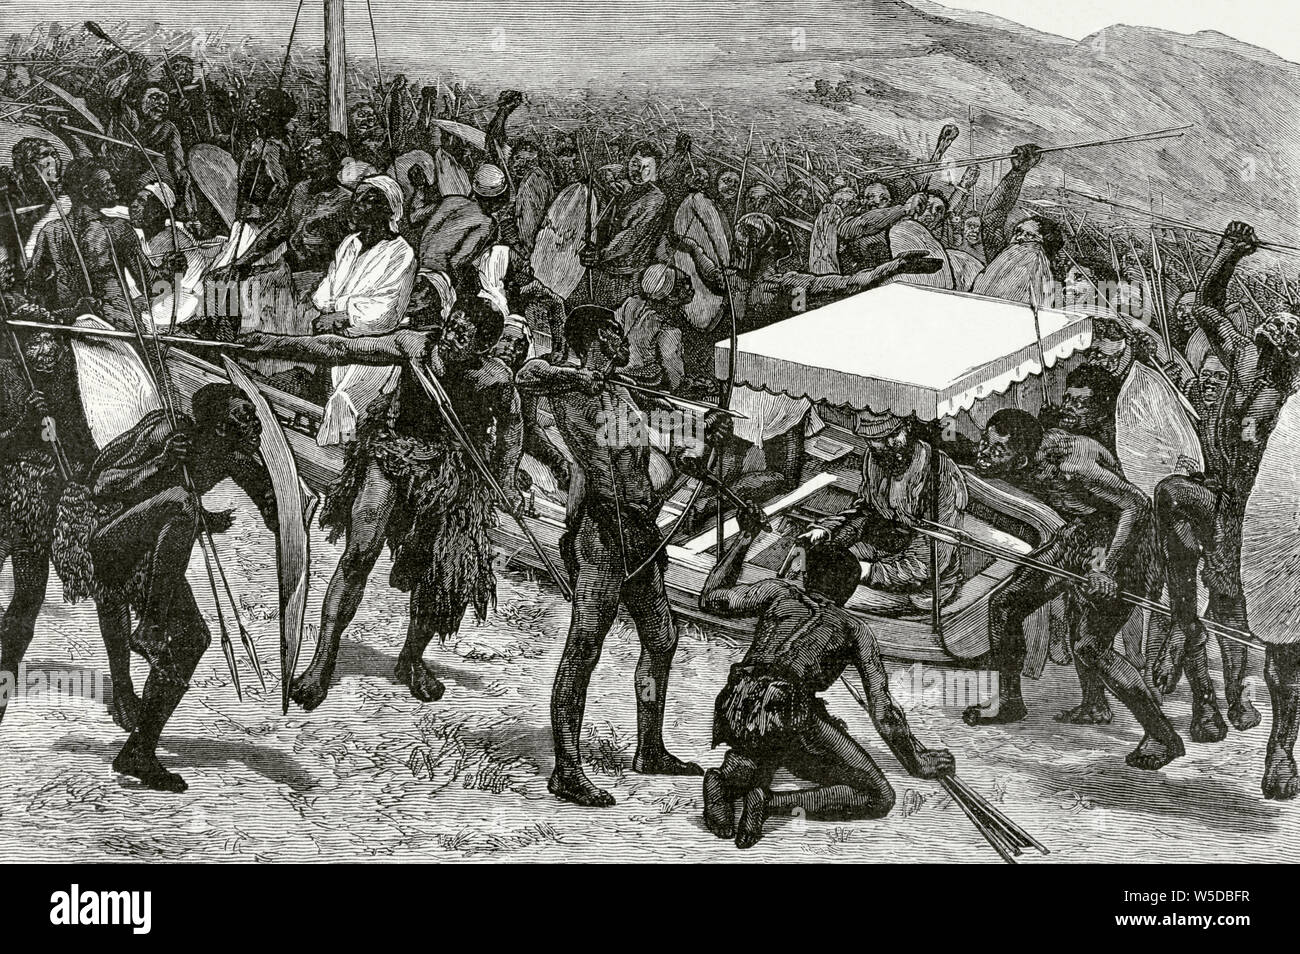 Central Africa. Expedition of Stanley. Reception at Bumbireh island. Engraving. Africa inexplorada, el Continente Misterioso by Henry Morton Stanley, c. 1887. Stock Photo